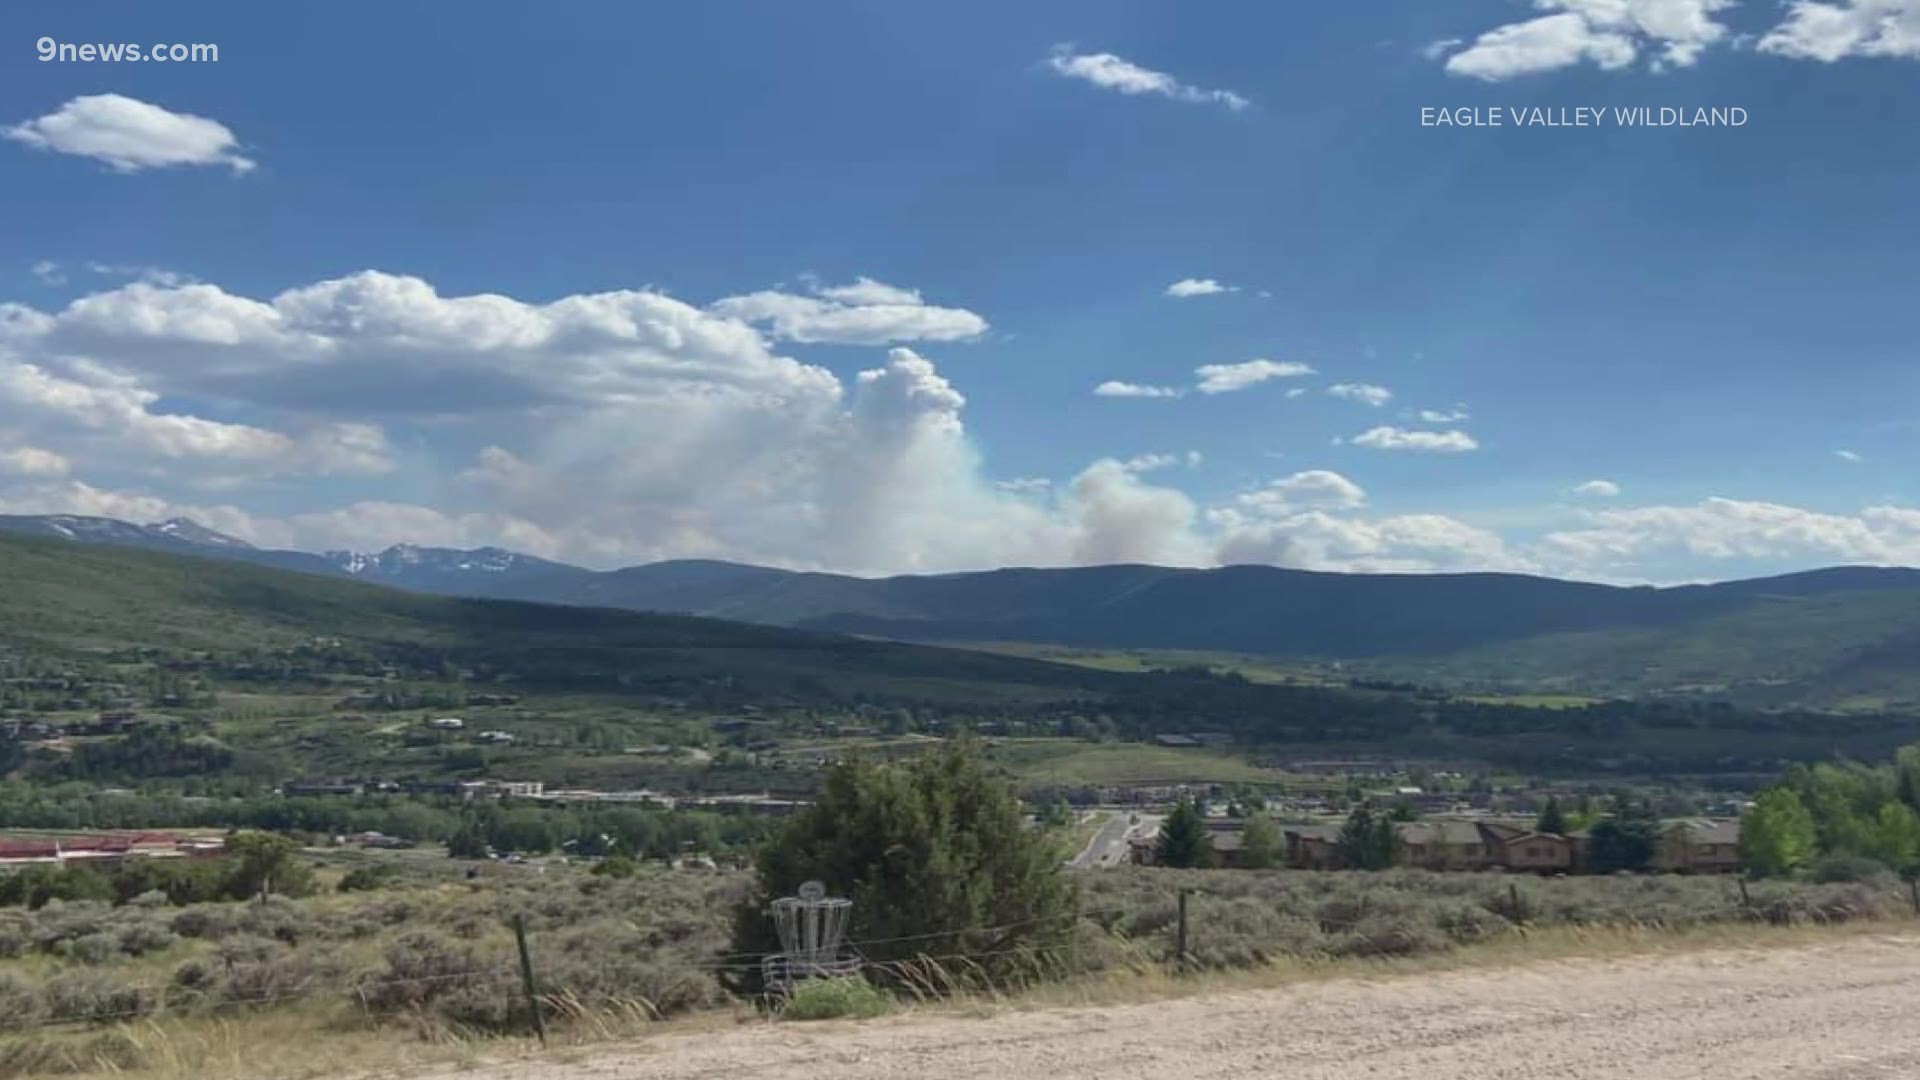 Multiple wildfires started burning in Colorado over the weekend. Here's what we know as of Monday.